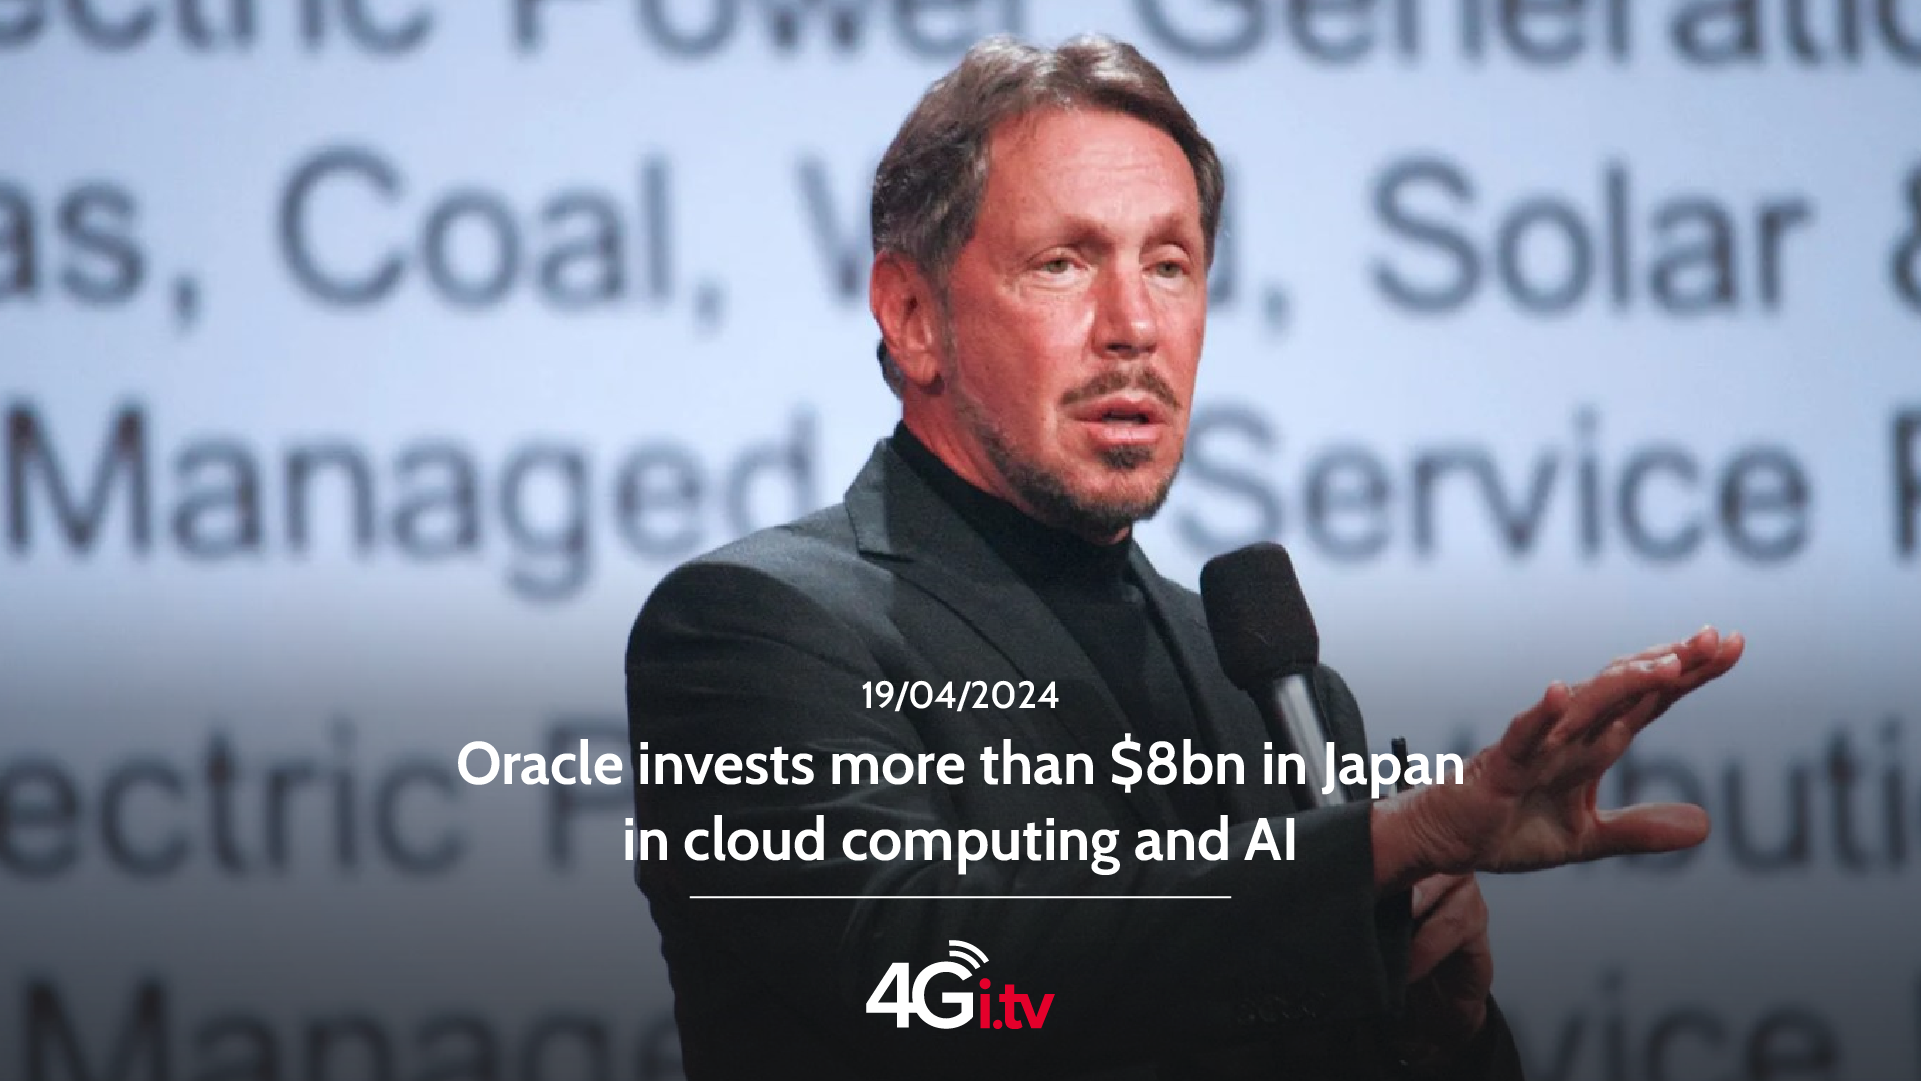 Подробнее о статье Oracle invests more than $8bn in Japan in cloud computing and AI